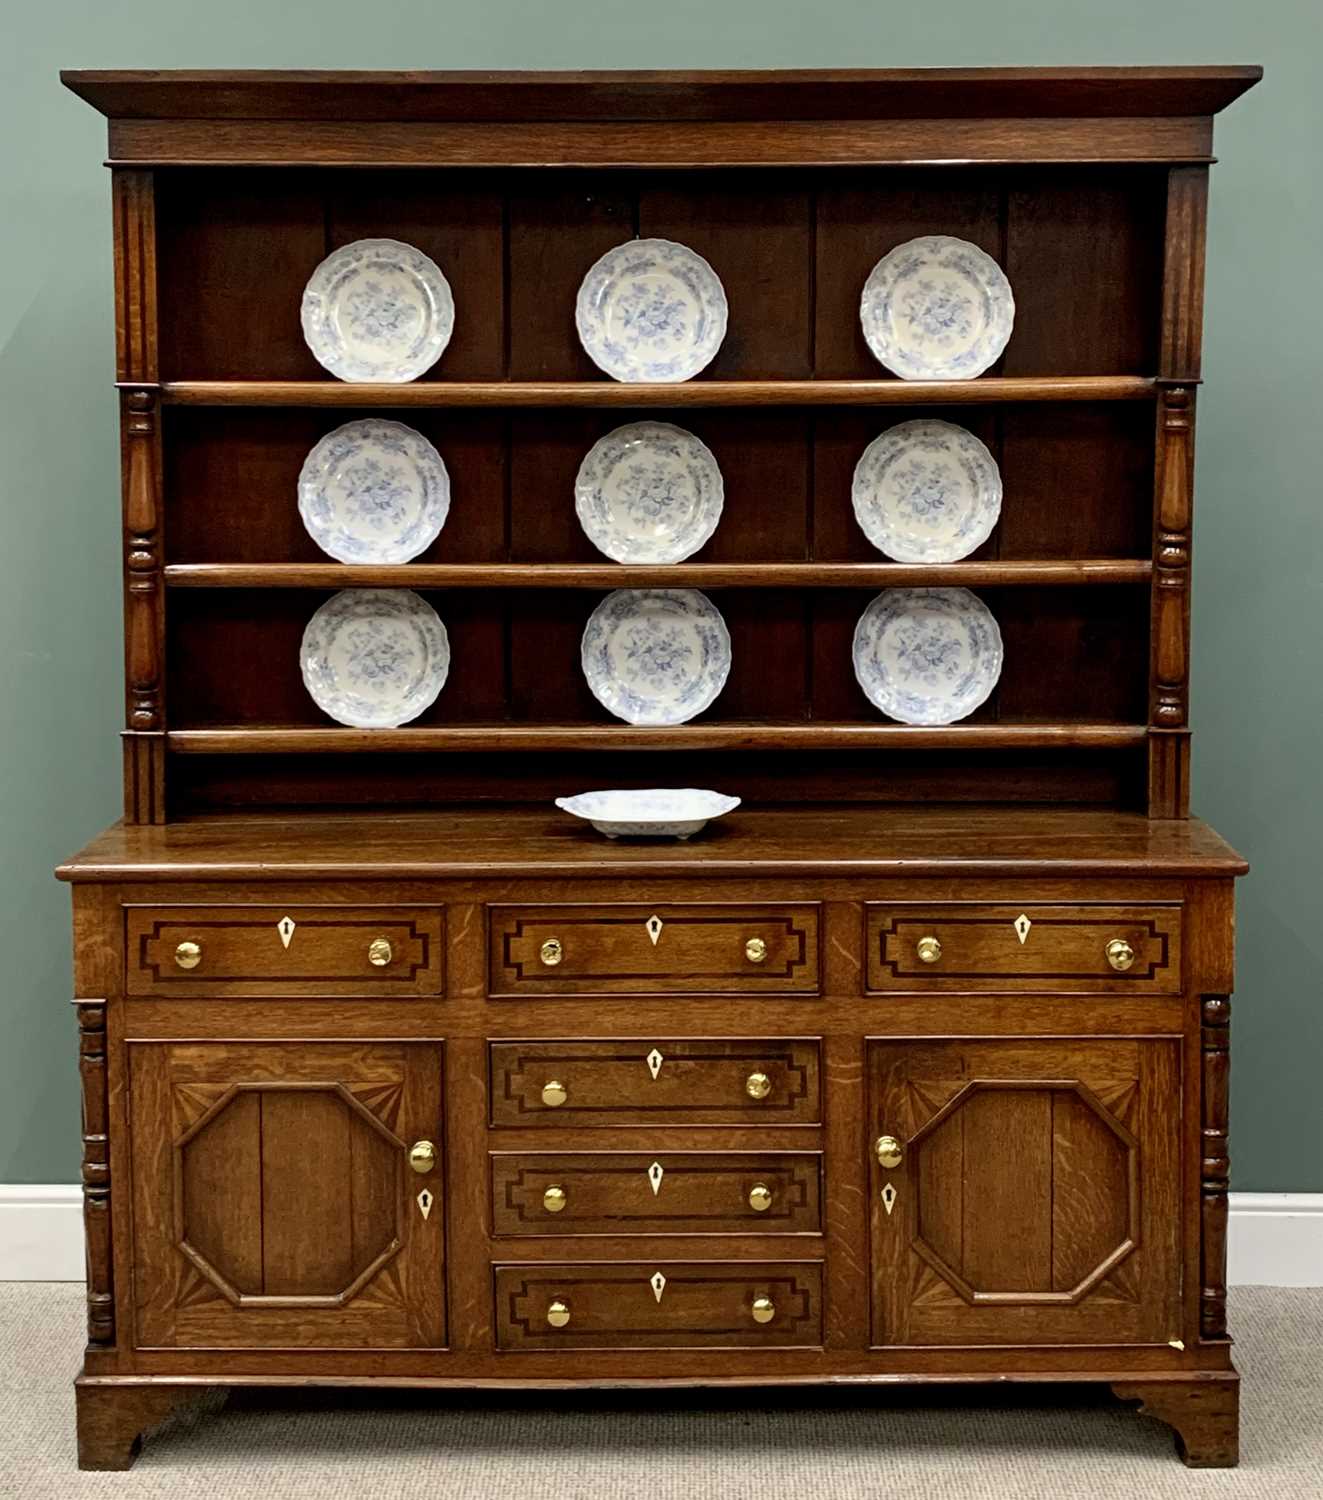 OAK NORTH WALES DRESSER - CIRCA 1860, well presented patina with blue and white dresser plates to